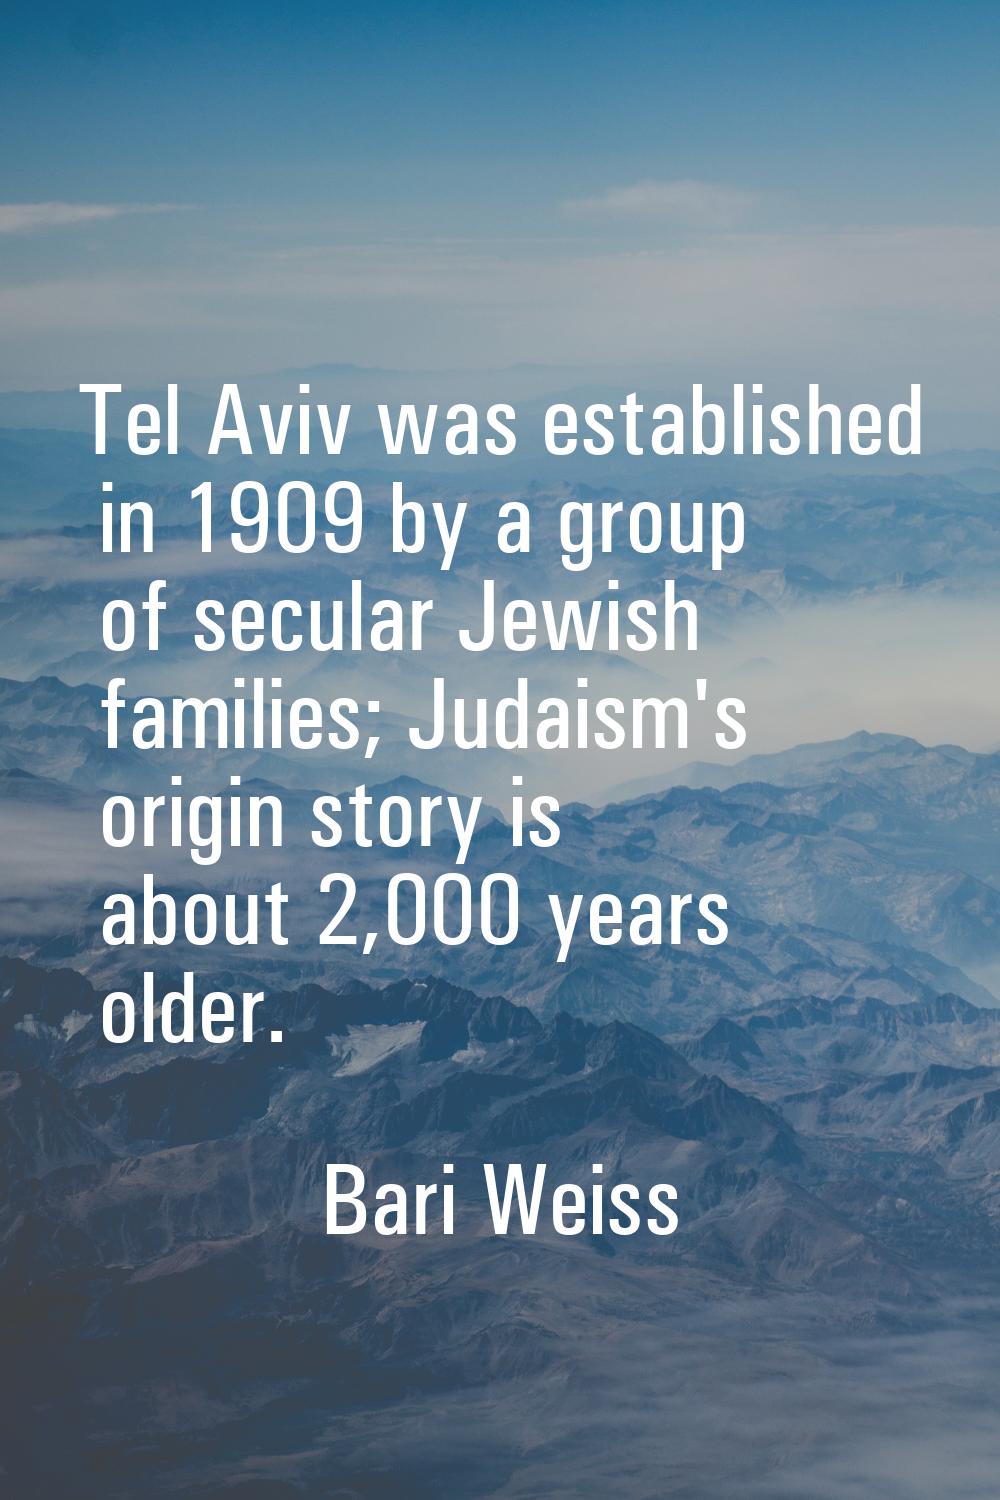 Tel Aviv was established in 1909 by a group of secular Jewish families; Judaism's origin story is a